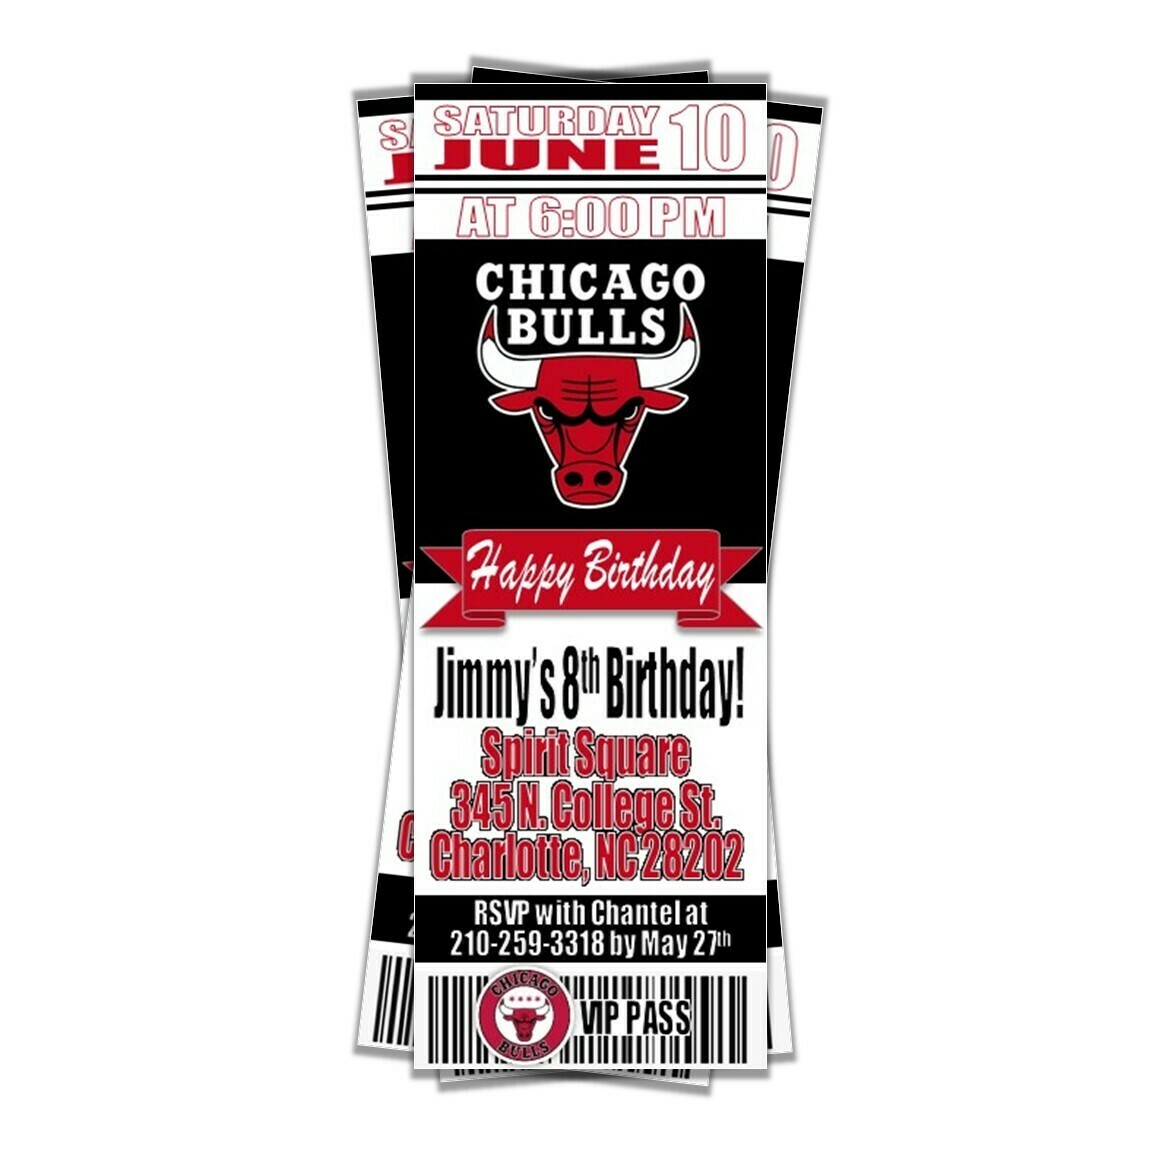 Chicago Bulls Party Basketball Ticket Vertical II